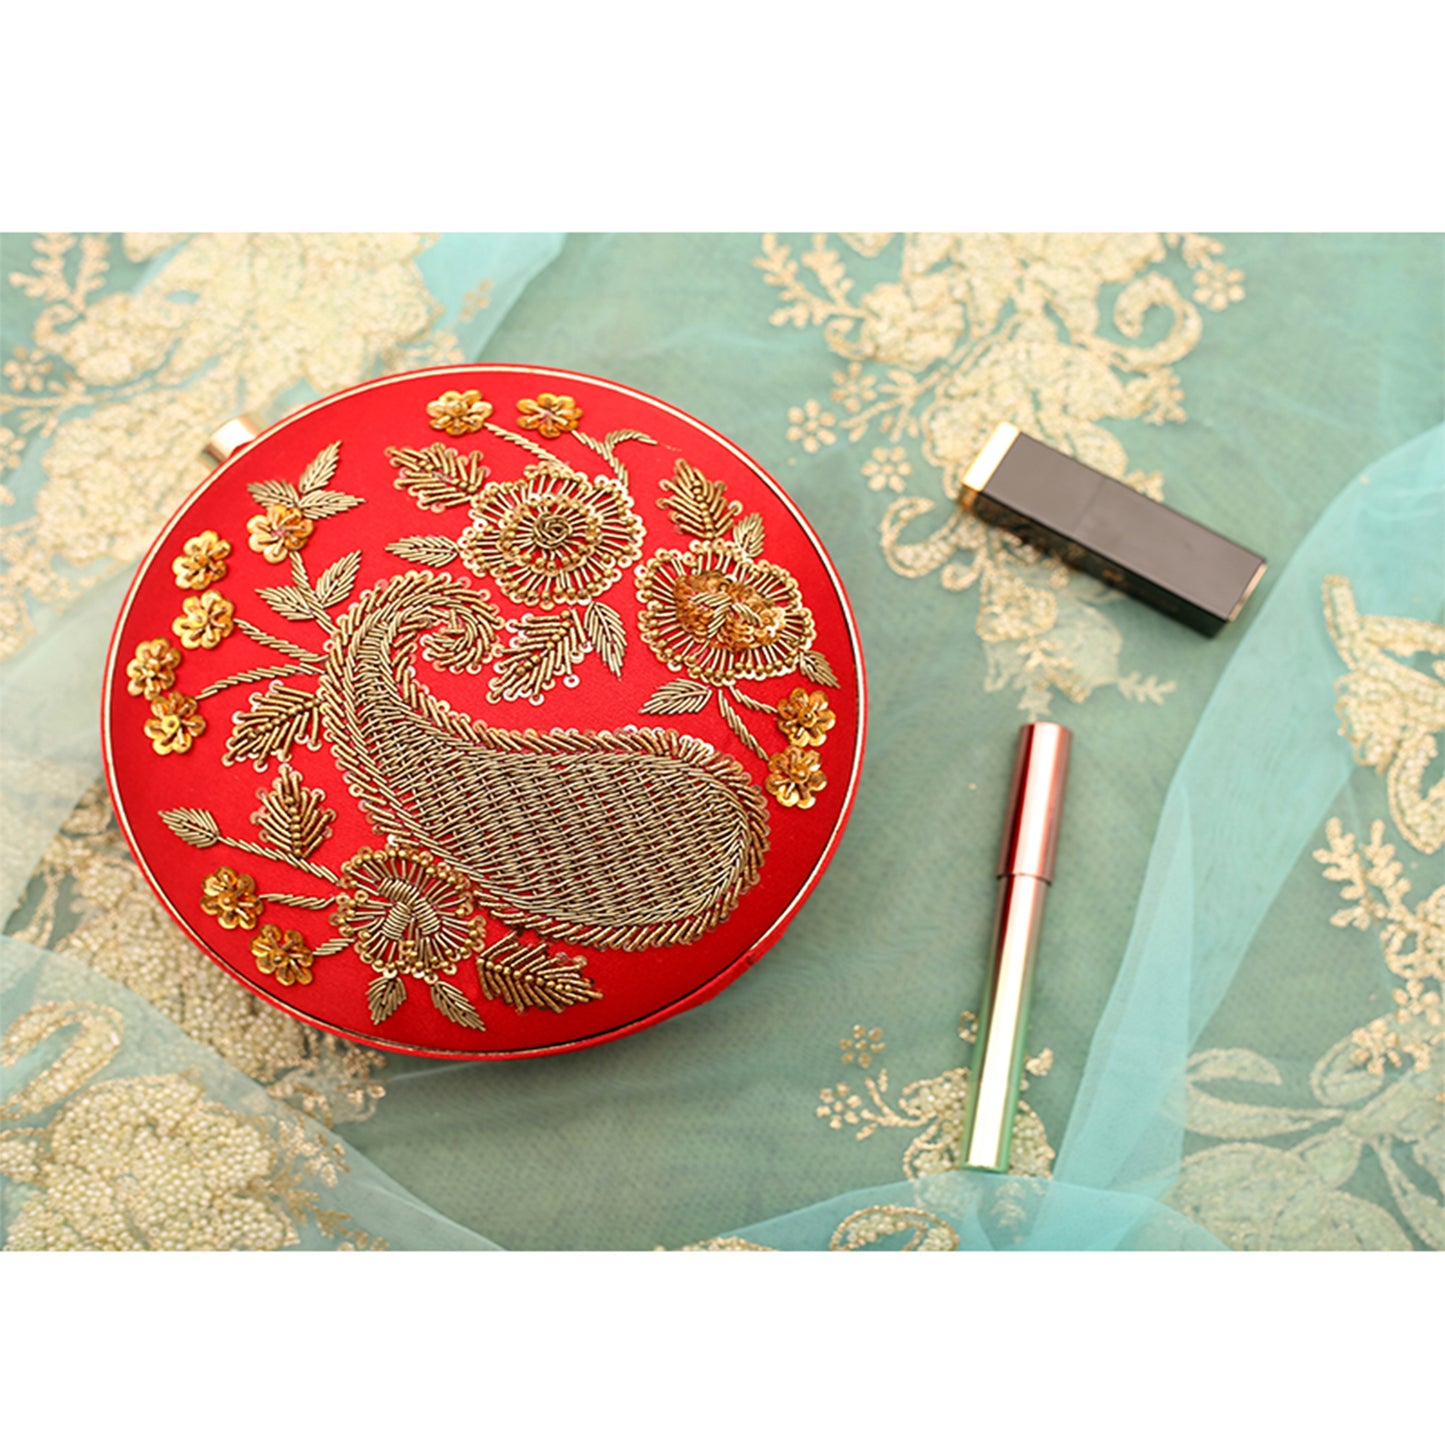 Angeline's Red Clutch Bag with Golden Hand Embroidery Work